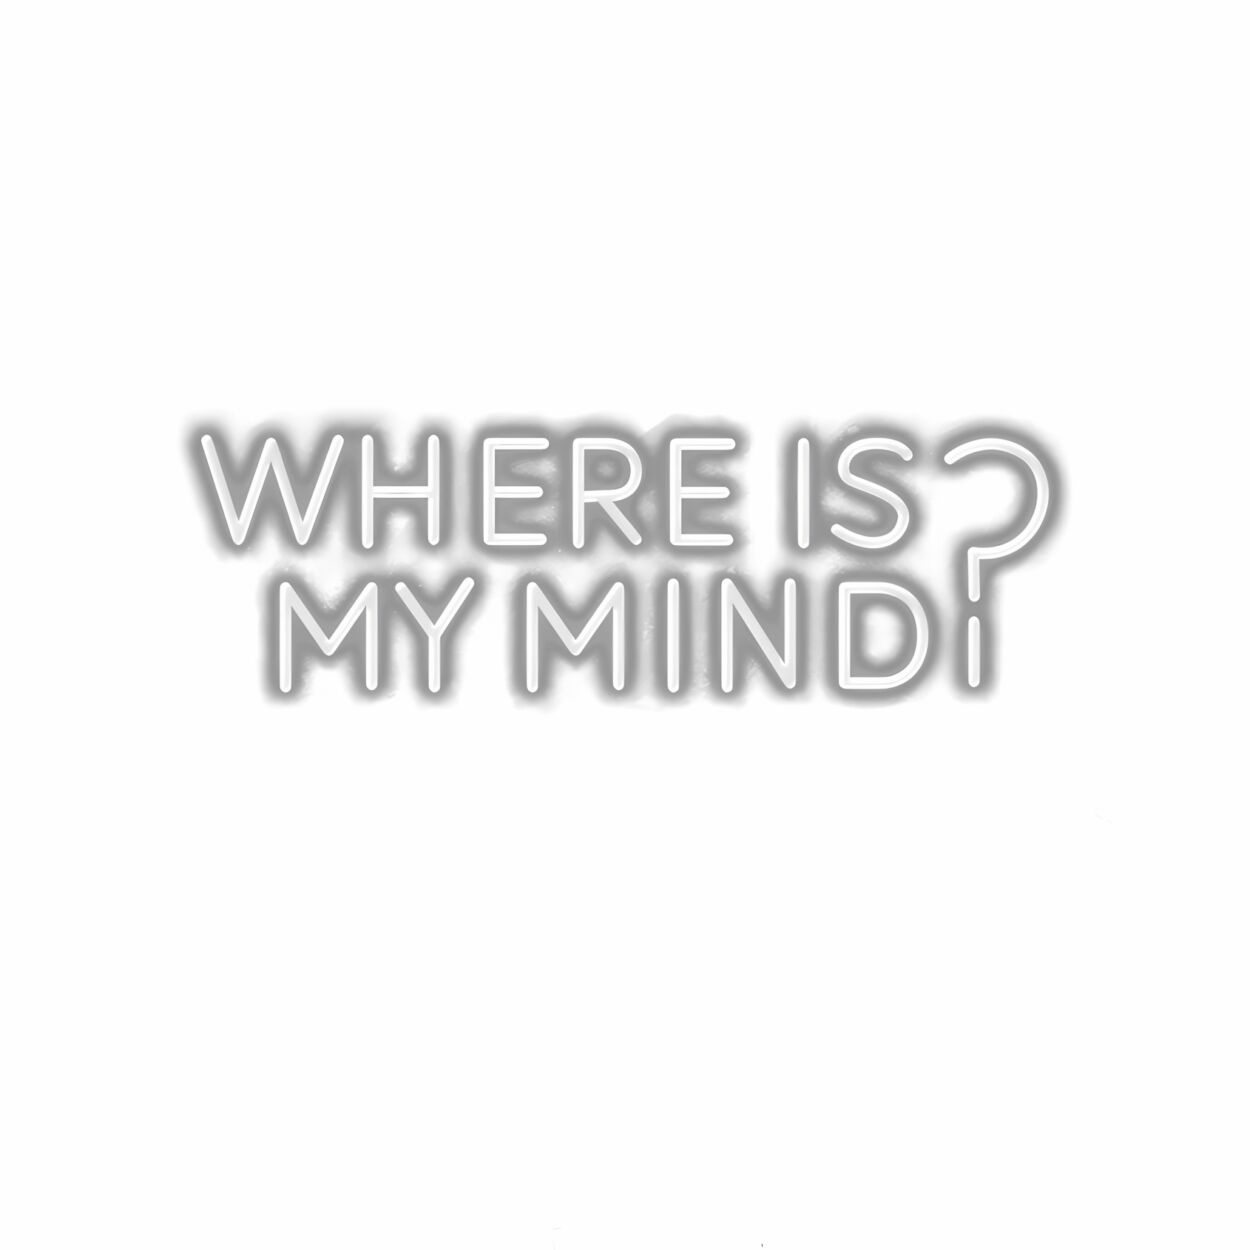 Embossed text "Where Is My Mind?" on white background.